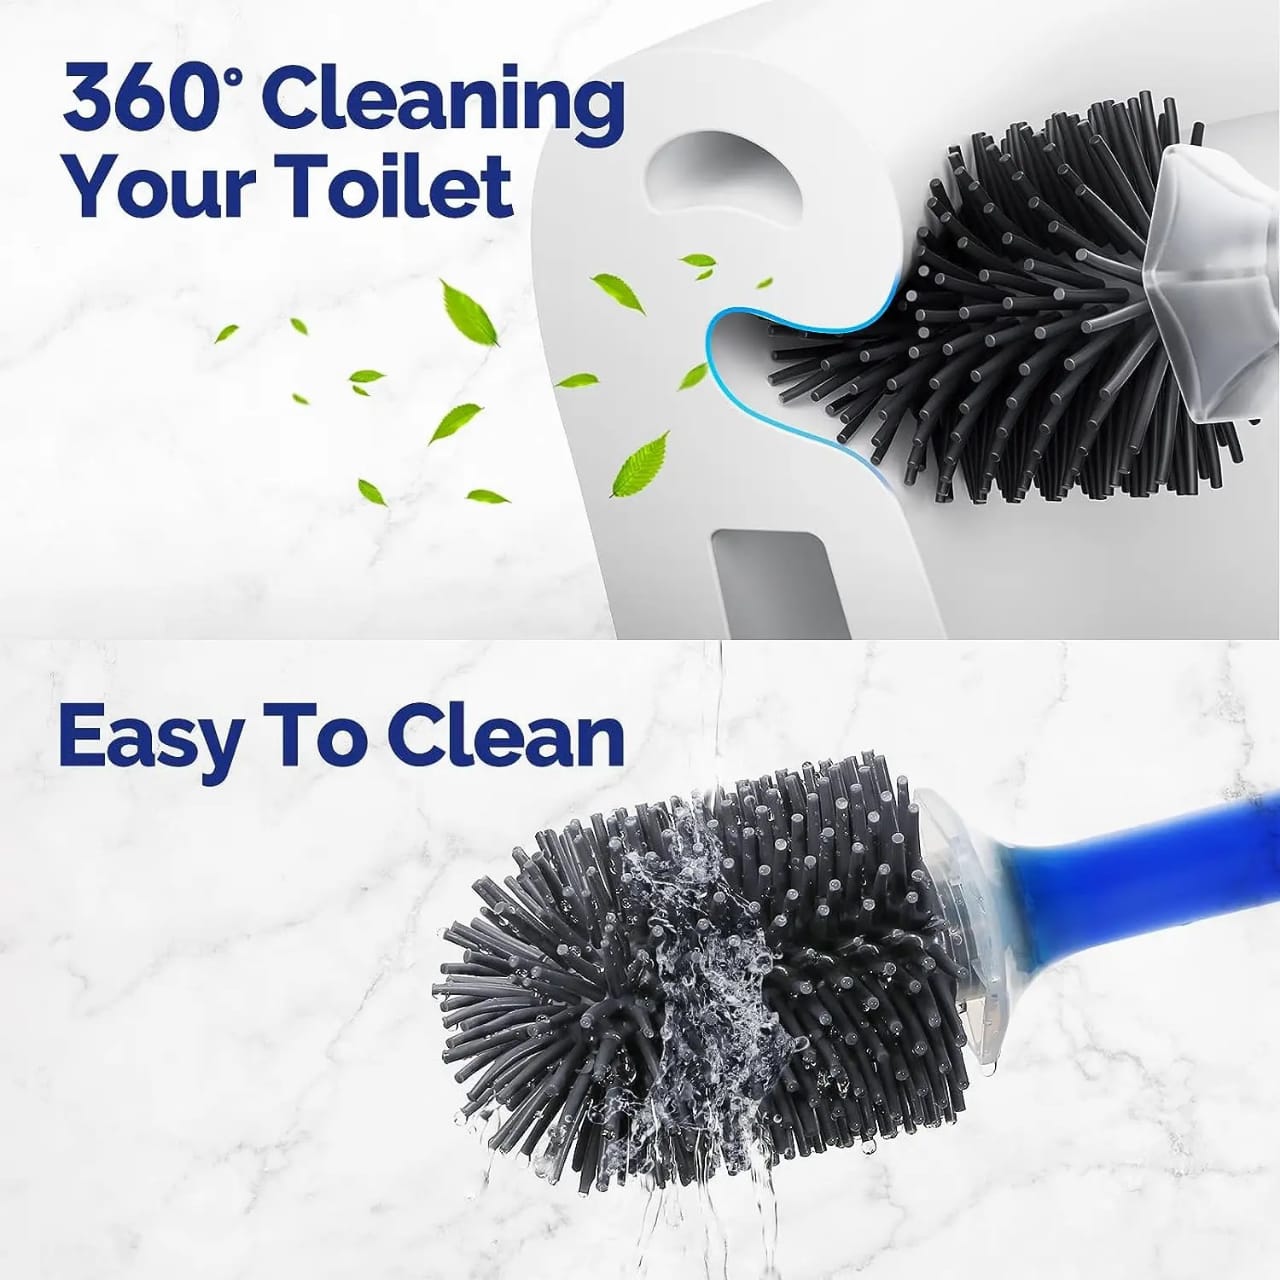 Detergent Refillable Toilet Cleaning Brush.